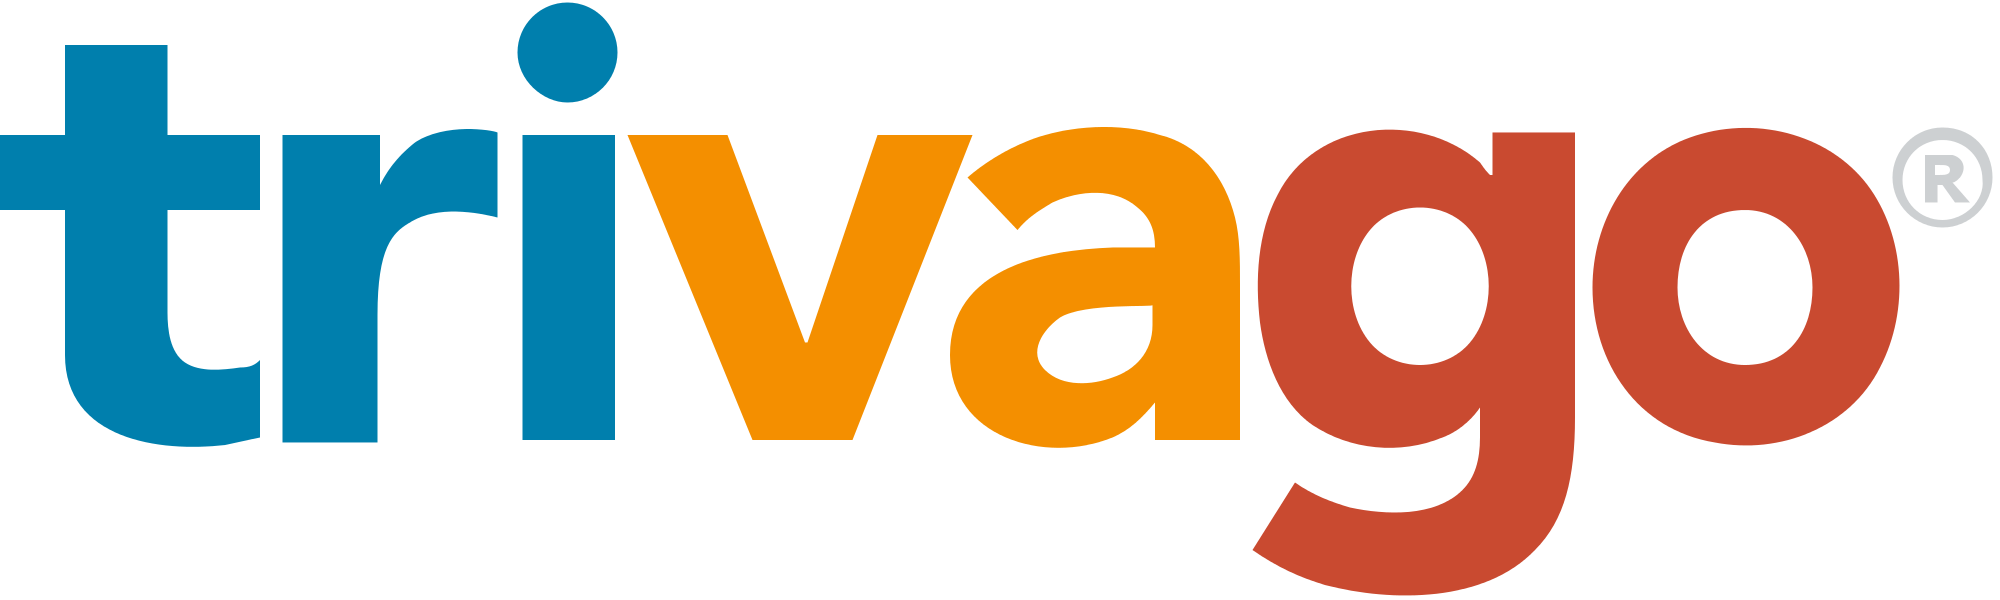 trivago png open 2000